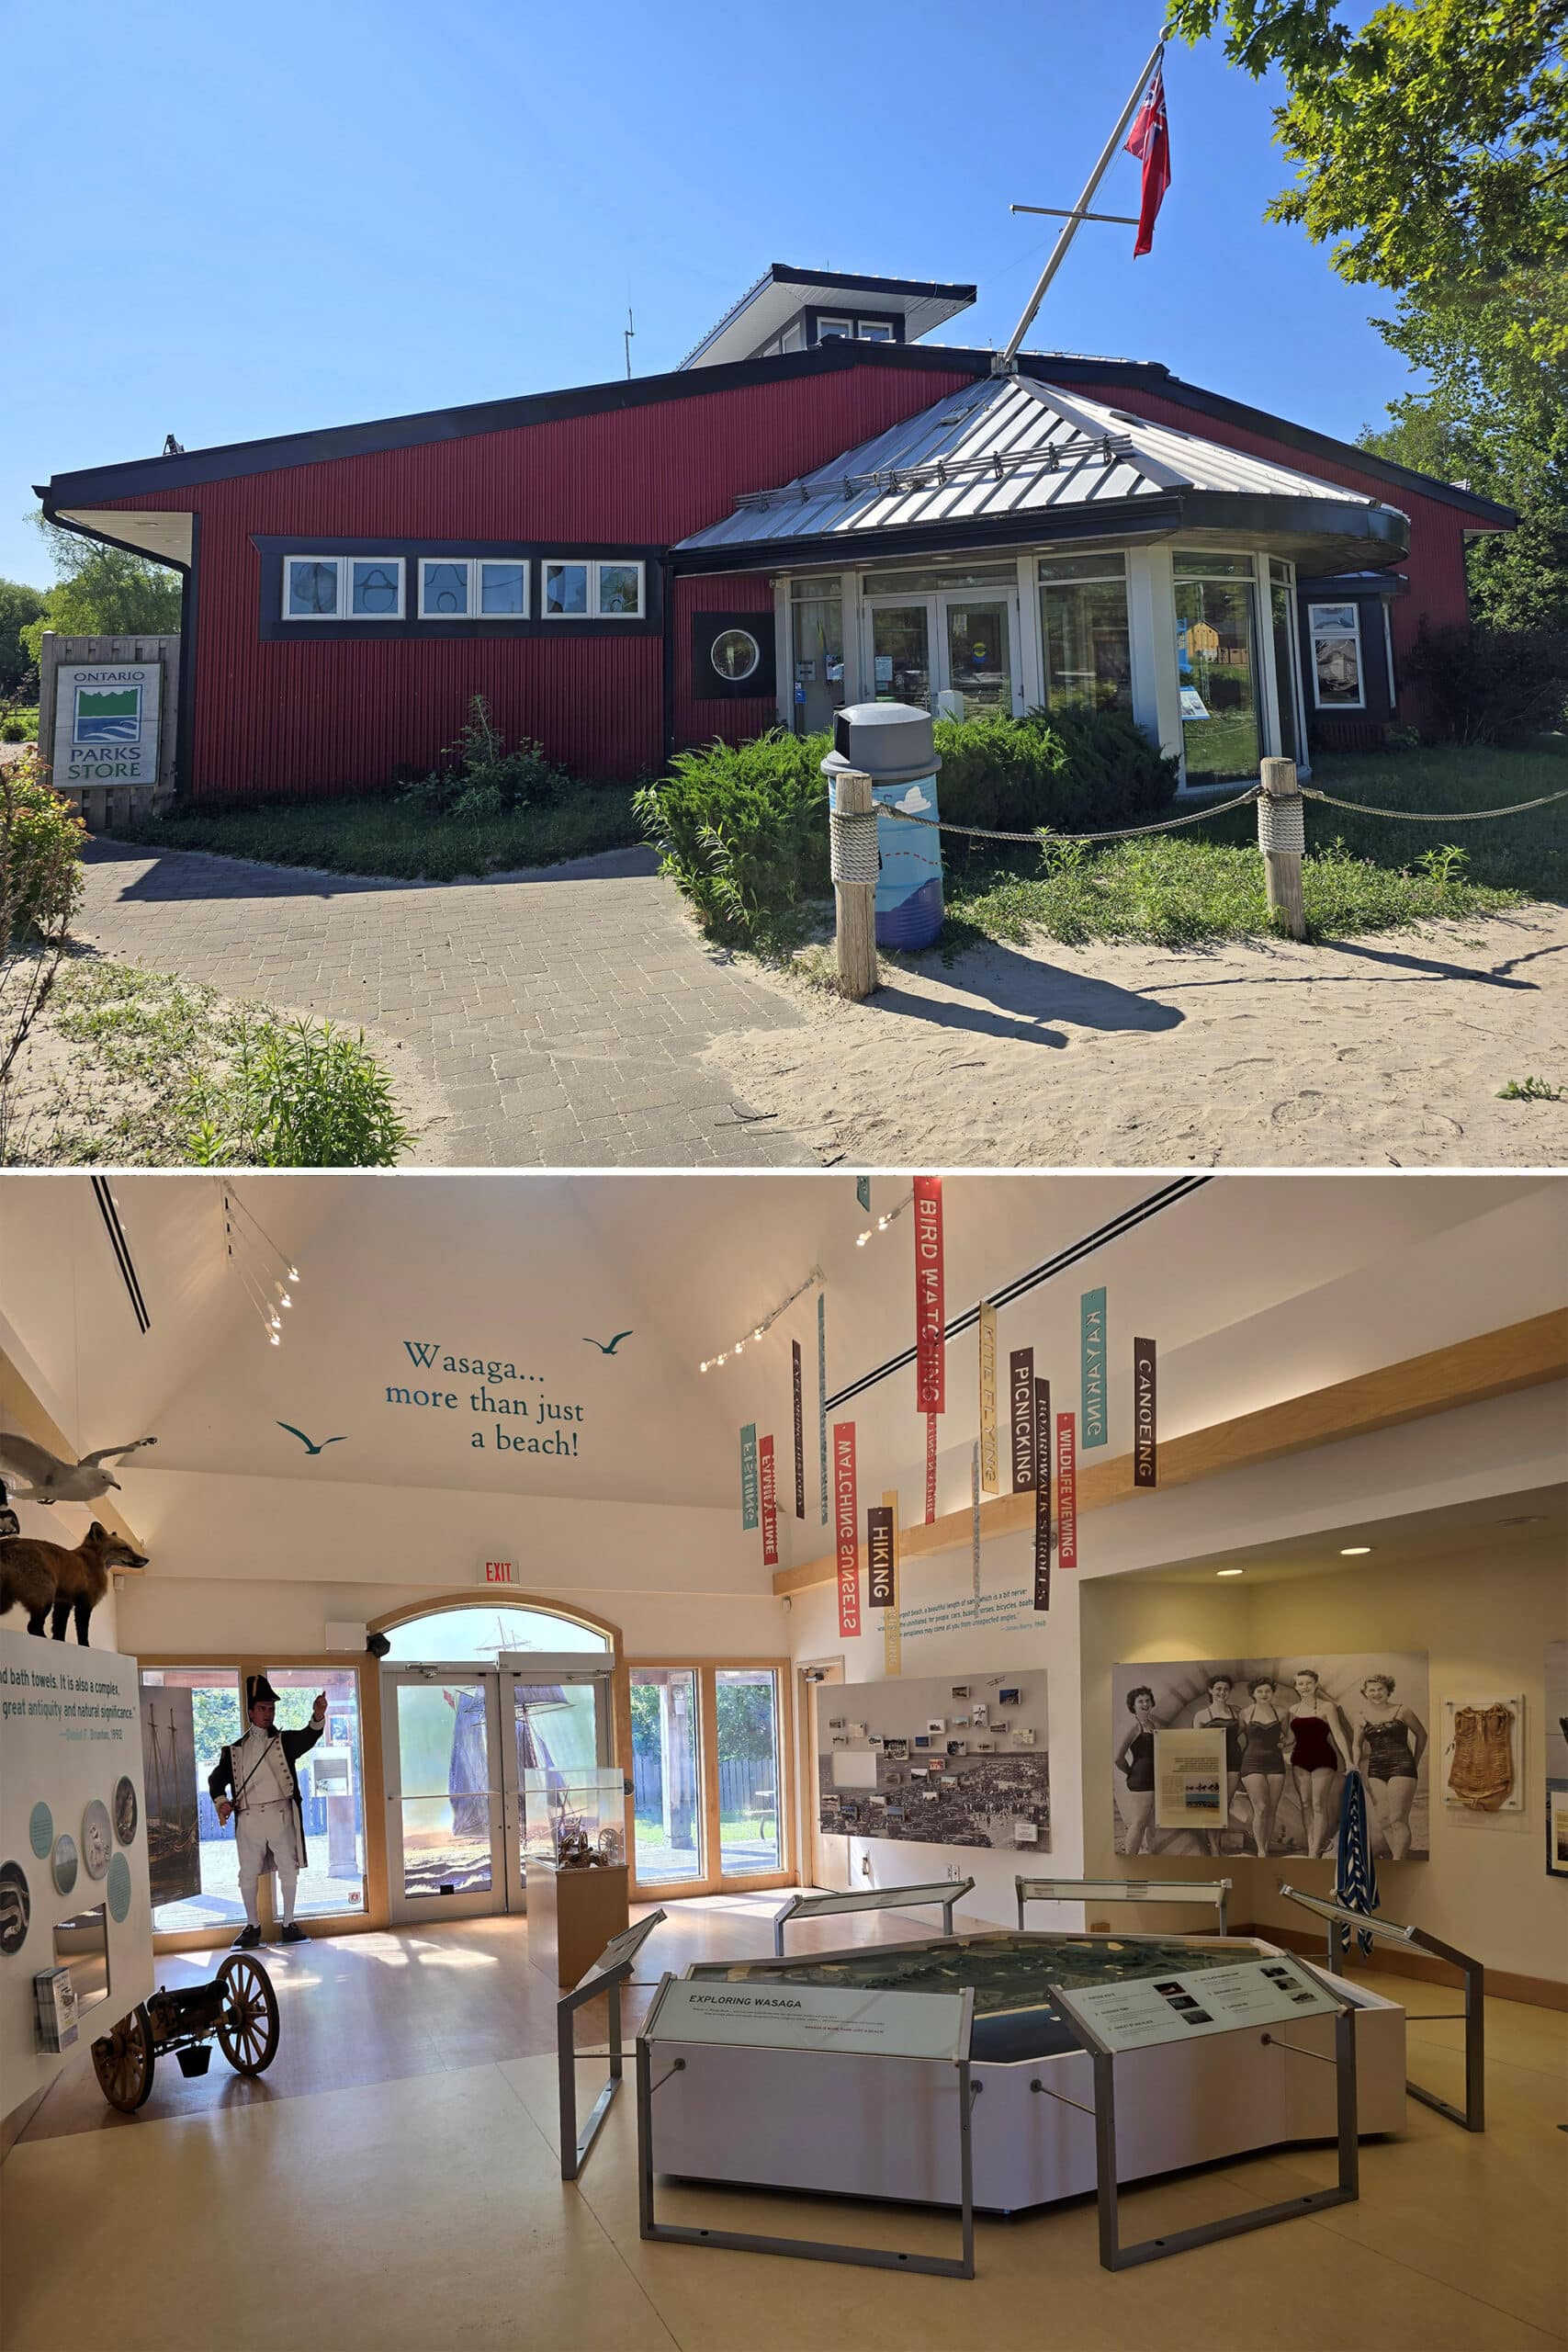 2 part image showing the inside and outside of the wasaga beach welcome centre.